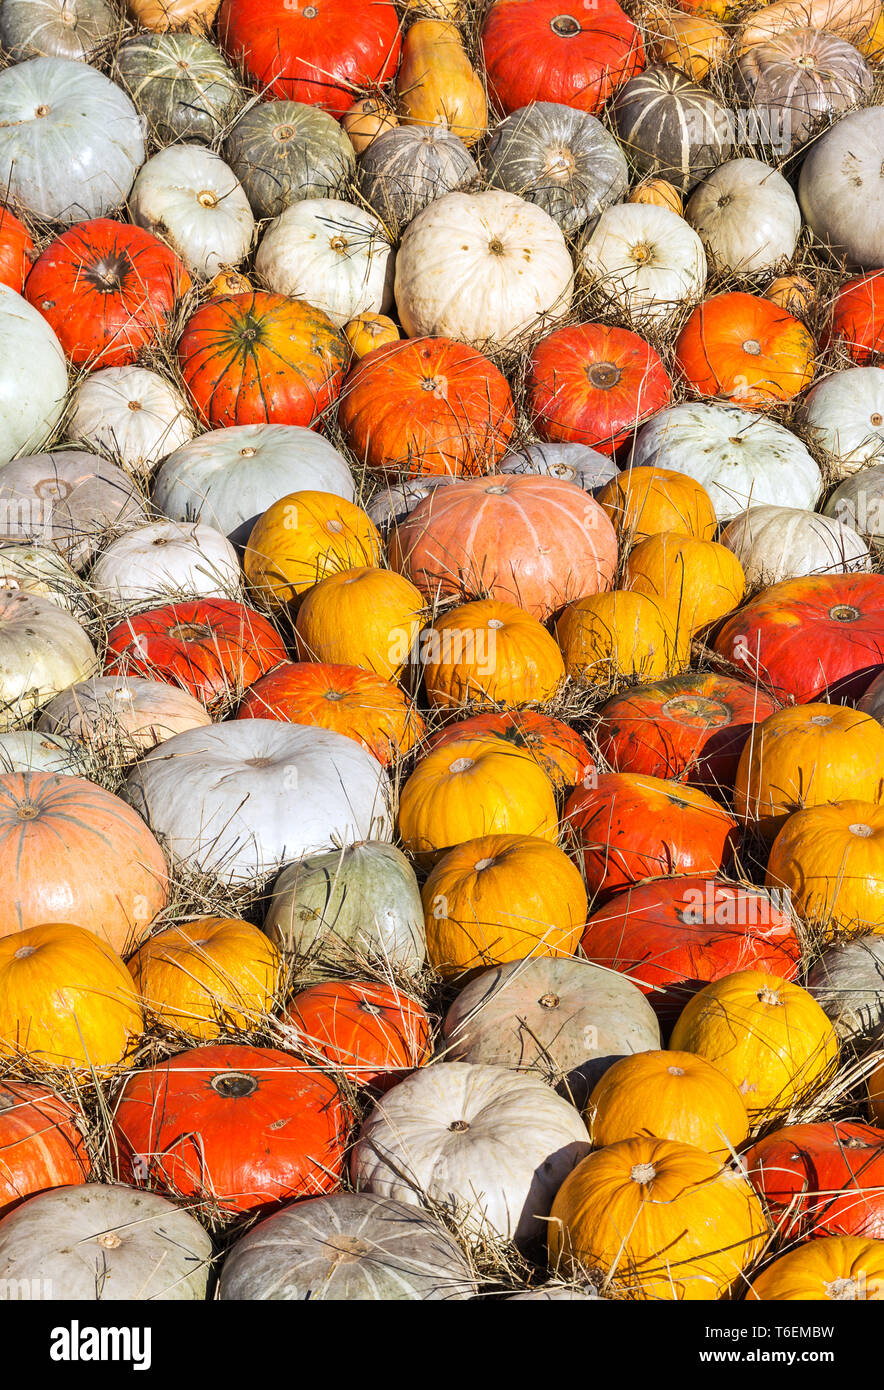 Background of round colorful pumpkins Stock Photo